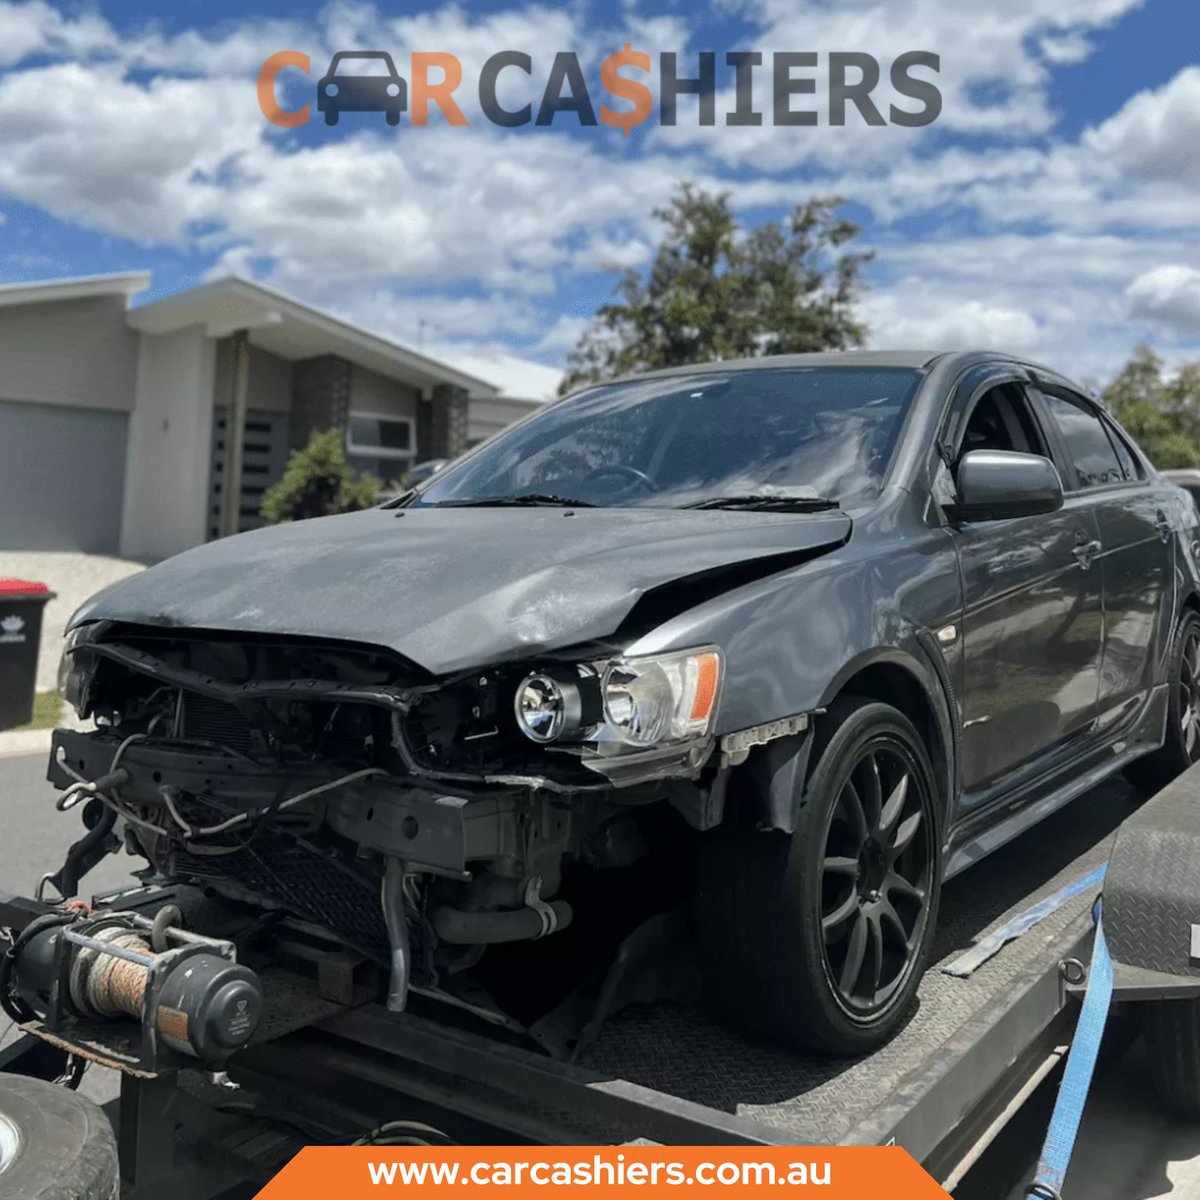 🚗💰 @CarCashiers is here to help with the best prices in town! 💸💯 Whether it's an old clunker or a vehicle that's seen better days, we'll offer you a fair deal and take it off your hands hassle-free.

📞0499 904 865

#CarCashiers #BestPrices #UnwantedCars #SellYourCar